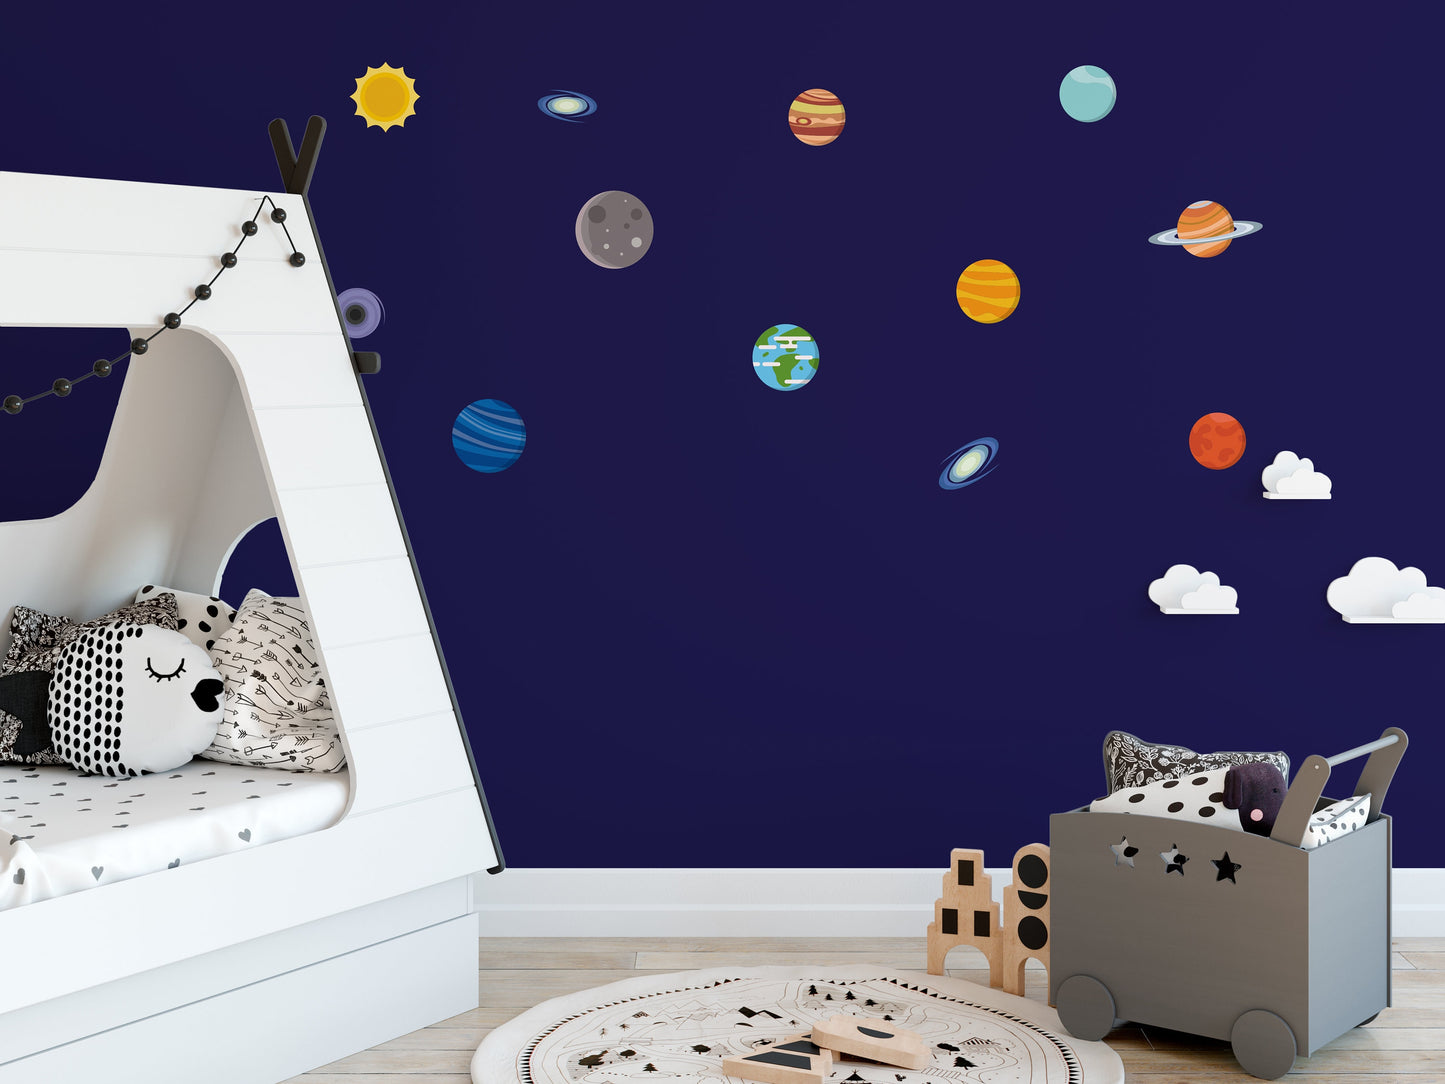 Planet Wall Stickers, Space Wall stickers, Outer Space Wall Decals, Planets Wall Art, Kids Wall Stickers, Childrens Wall Decals